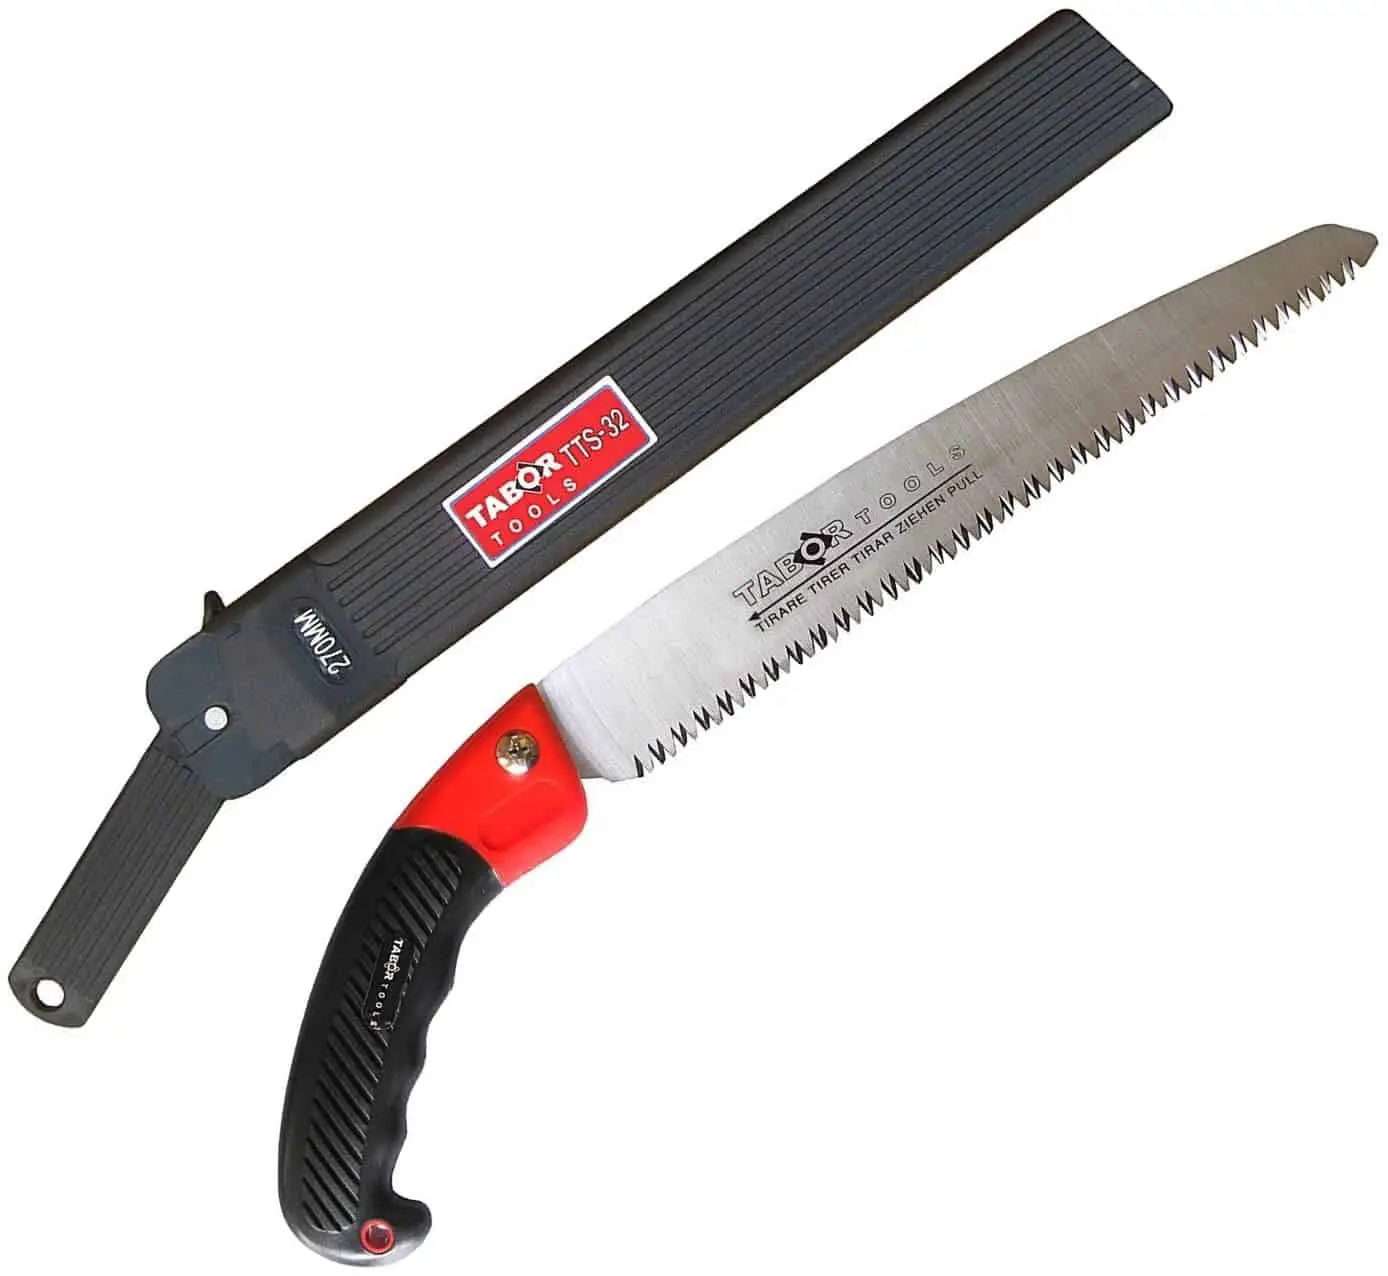 Best straight blade pruning saw for bush maintenance- TABOR TOOLS TTS32A 10 inch Saw with Sheath